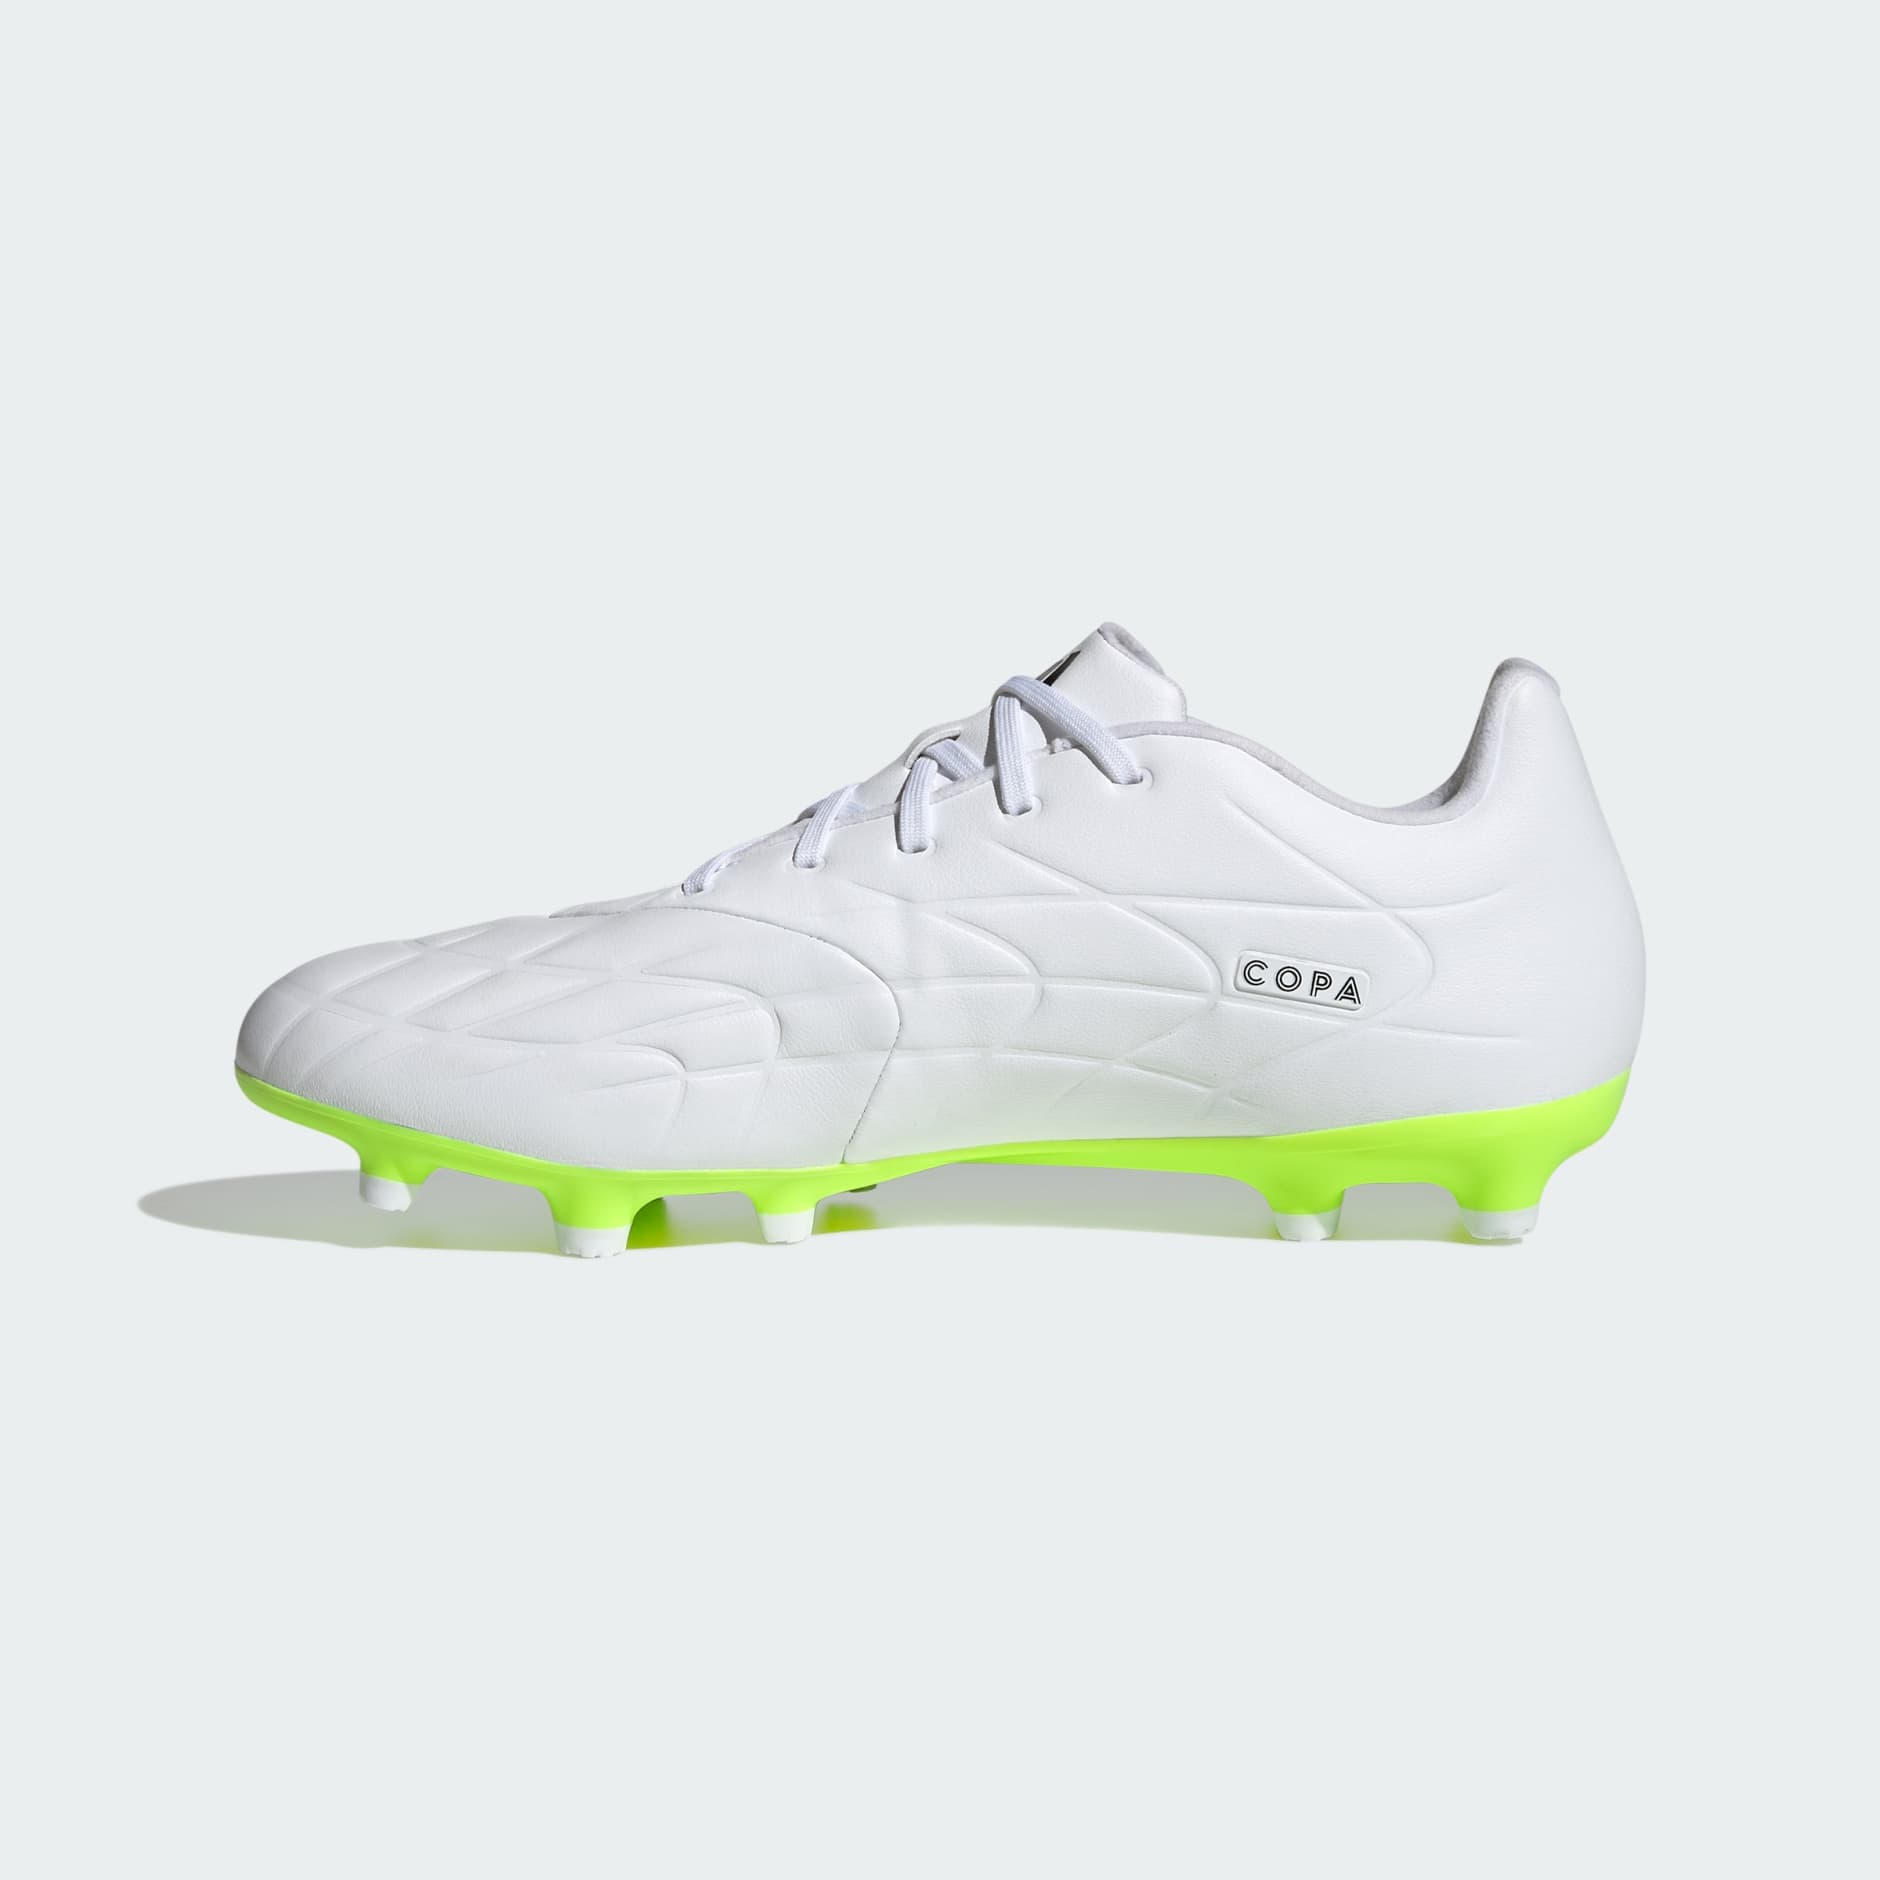 adidas X - Copa Pure.3 Firm Ground Boots - White | adidas South Africa